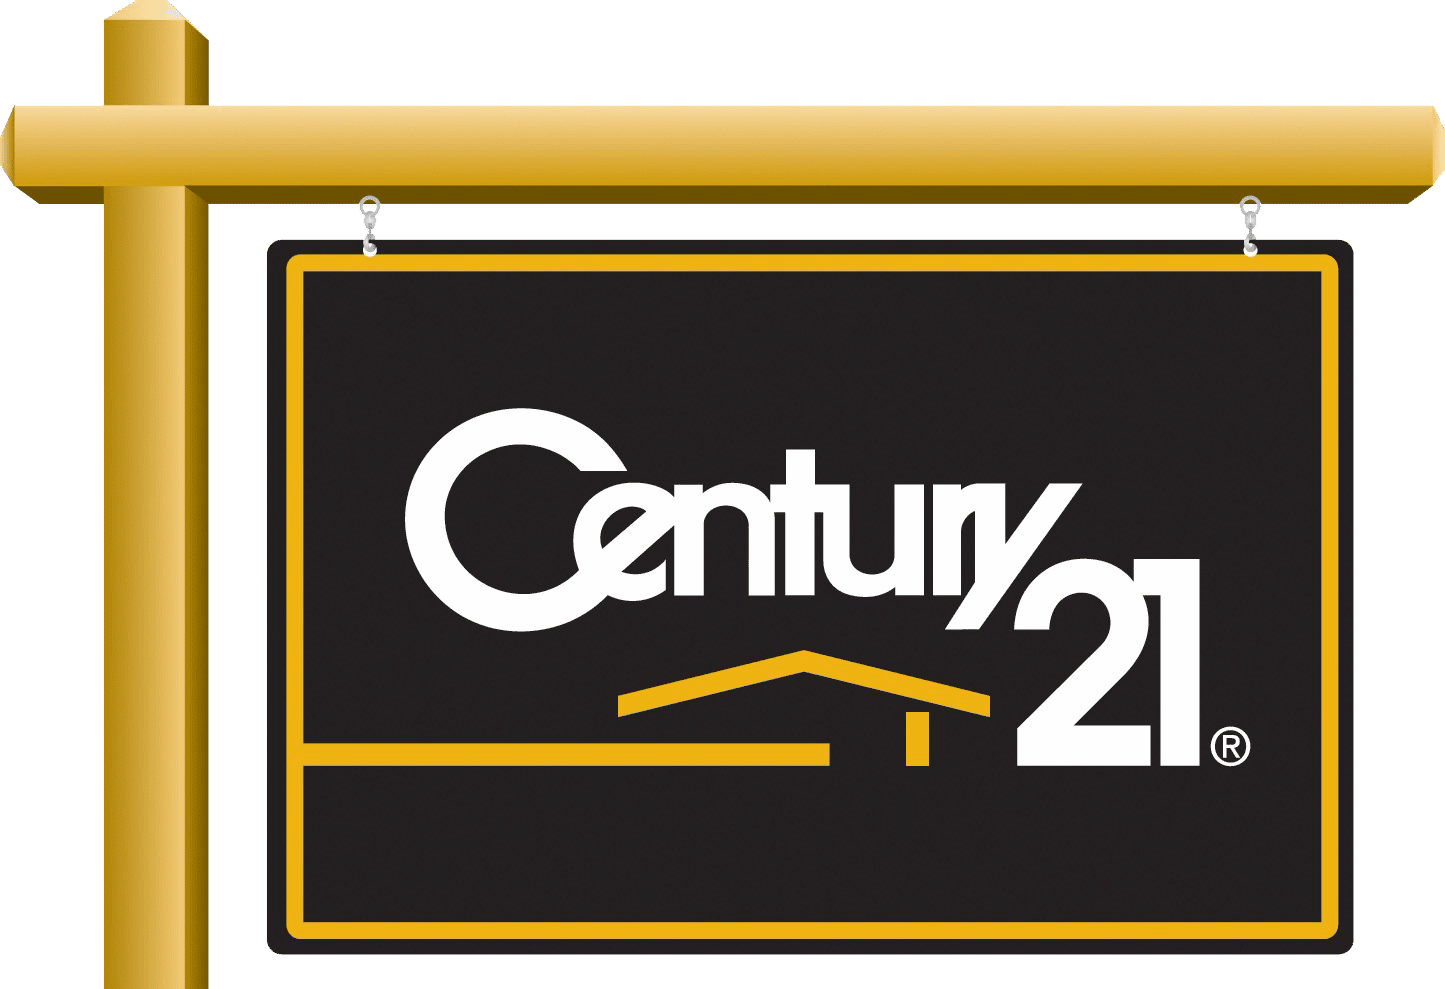 START UP REAL ESTATE BROKERAGE BRINGS THE CENTURY 21 BRAND BACK TO GREEN BAY